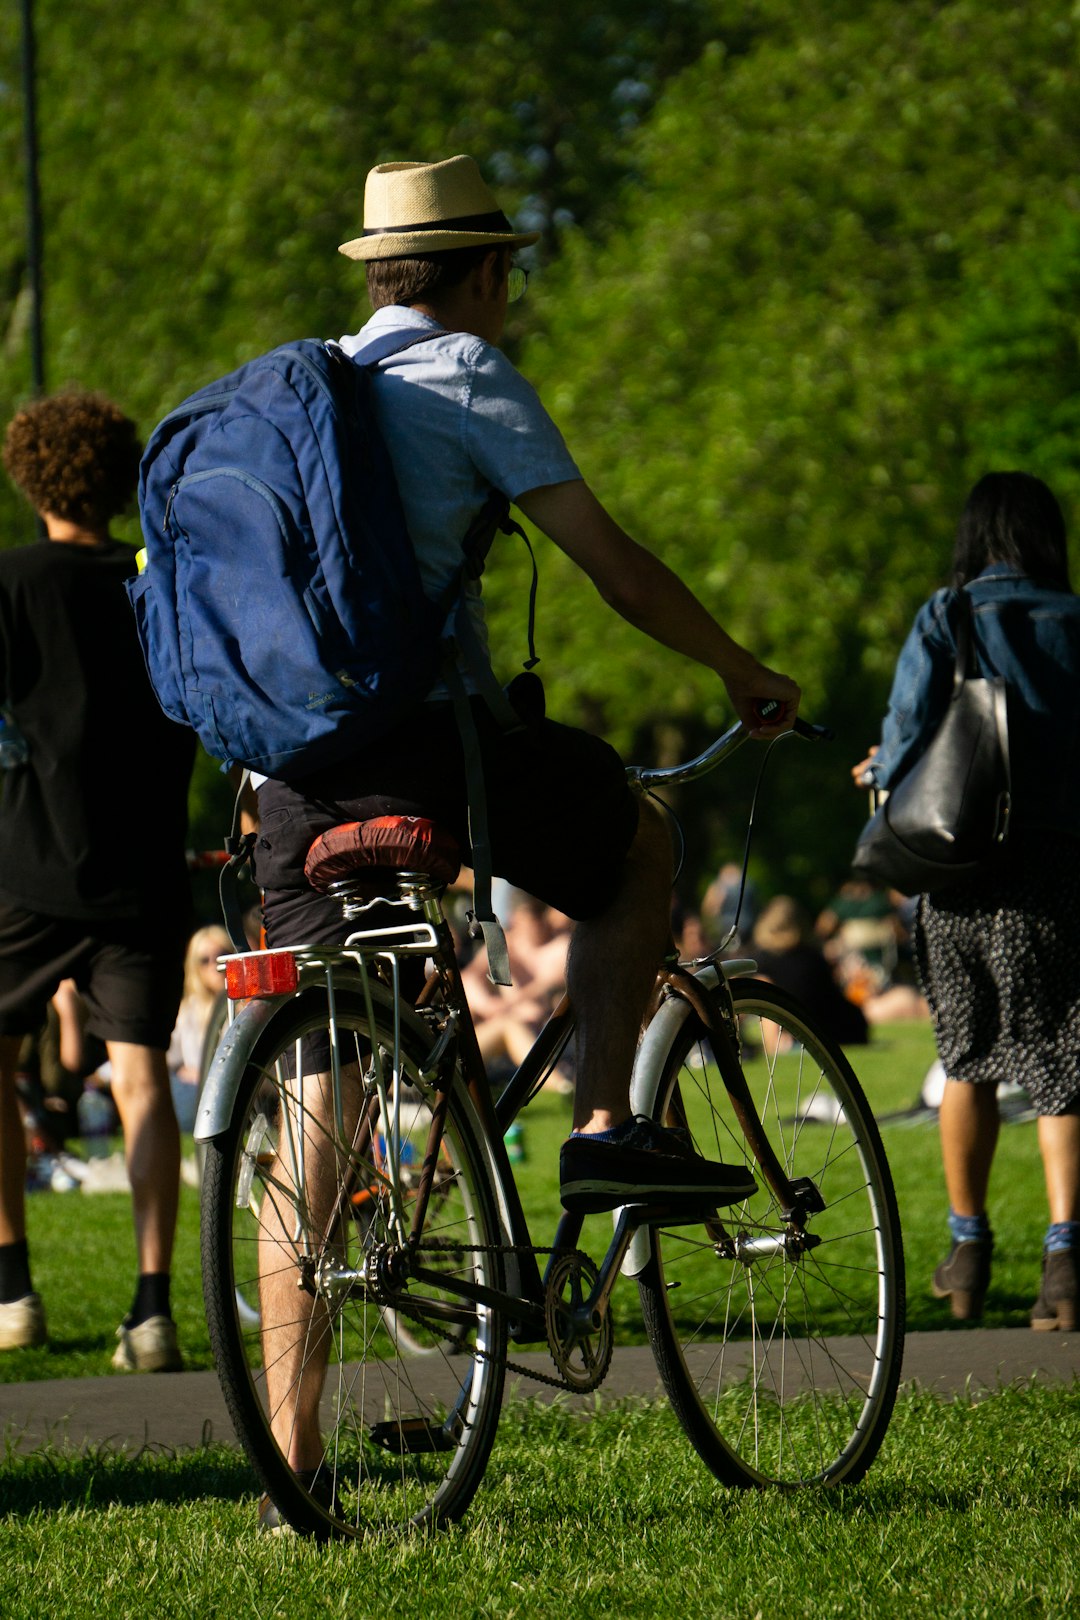 man in blue shirt and black backpack riding bicycle